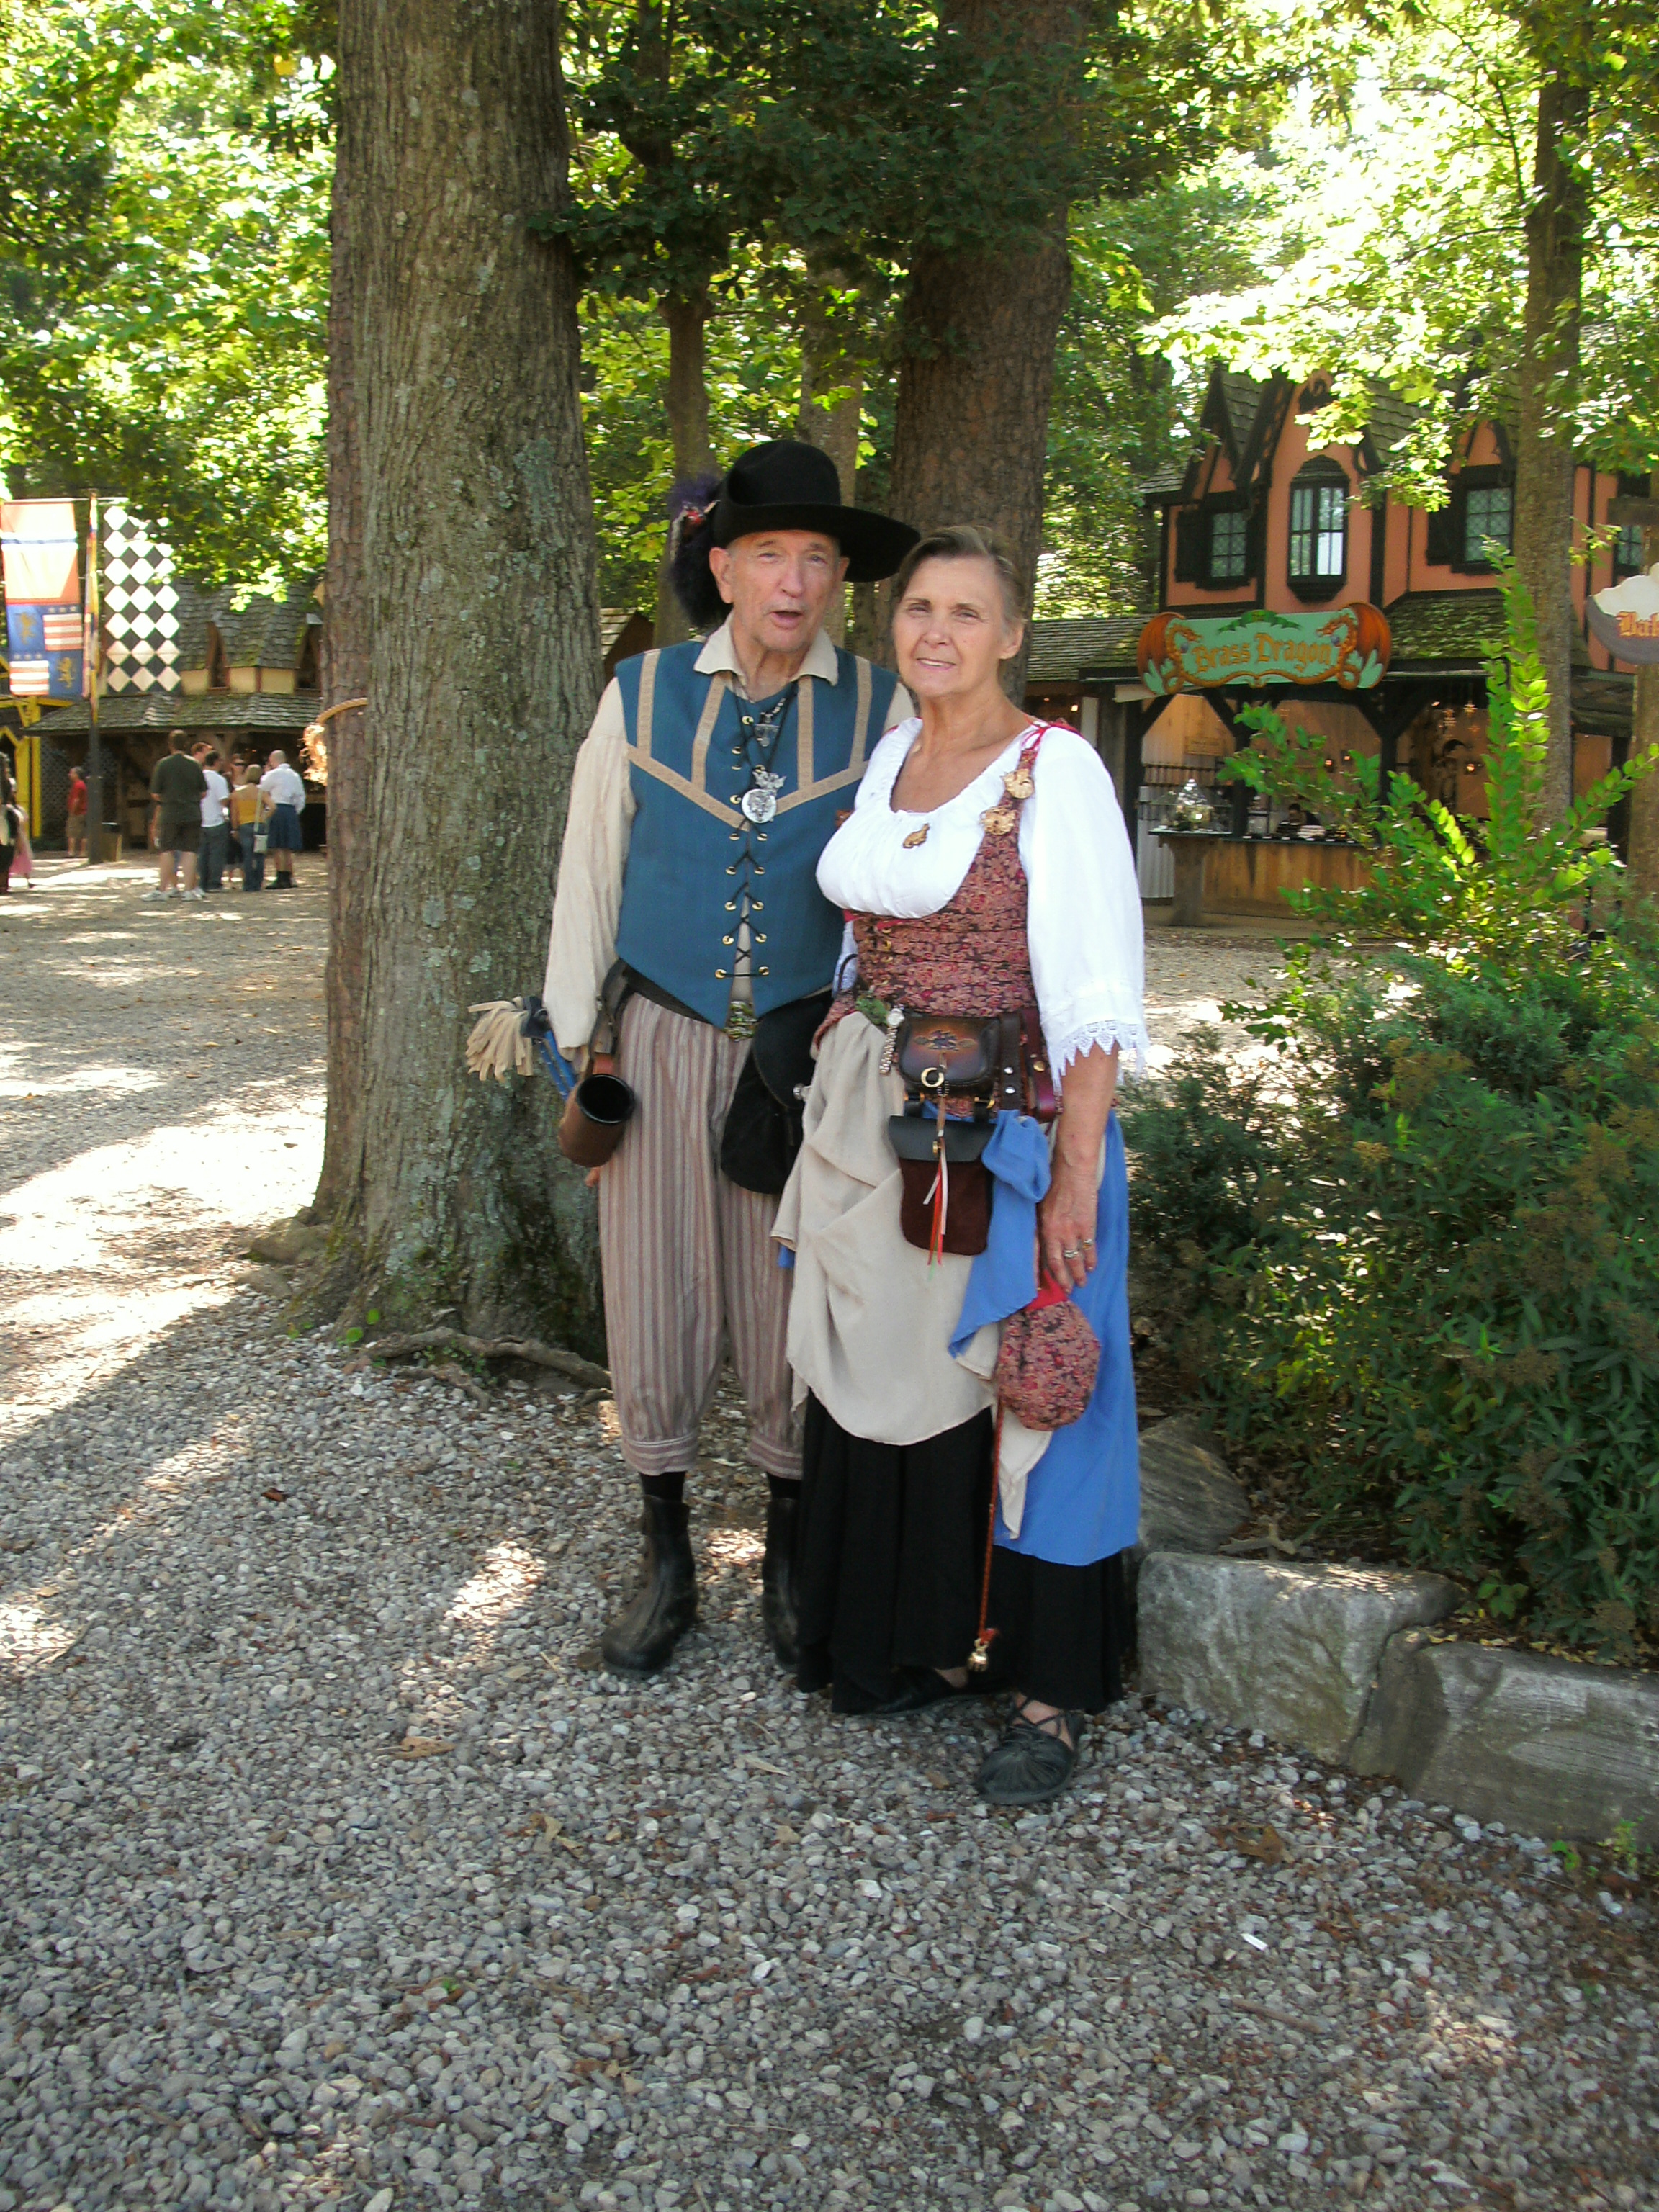 Don and Gay in Garb at MD Ren Fest - September 2008